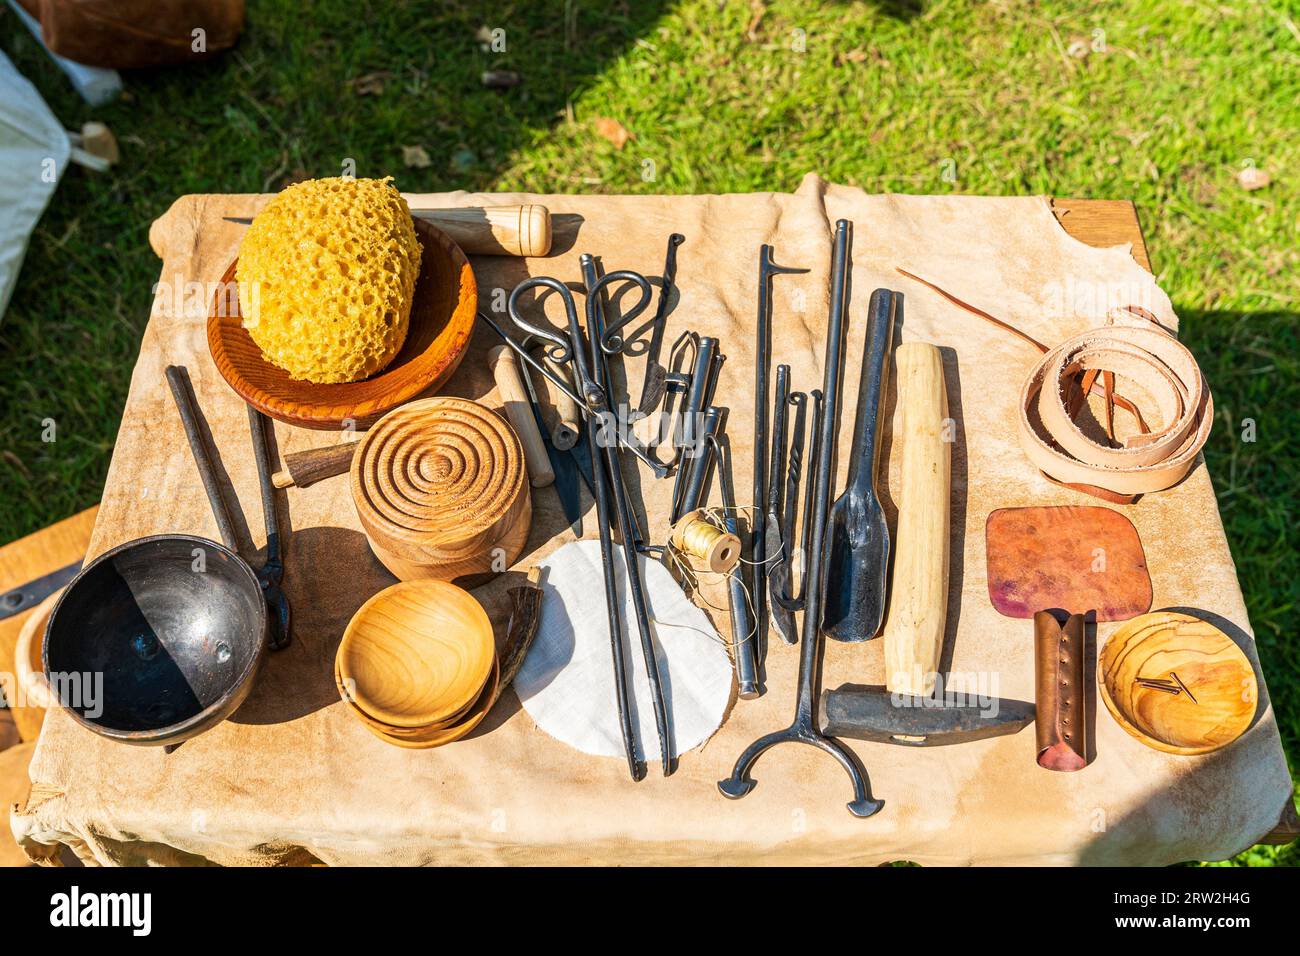 Top down view of medieval medical instruments on a table covered with a leather hide. Includes bowls, metal tools, and other surgical instruments. Stock Photo